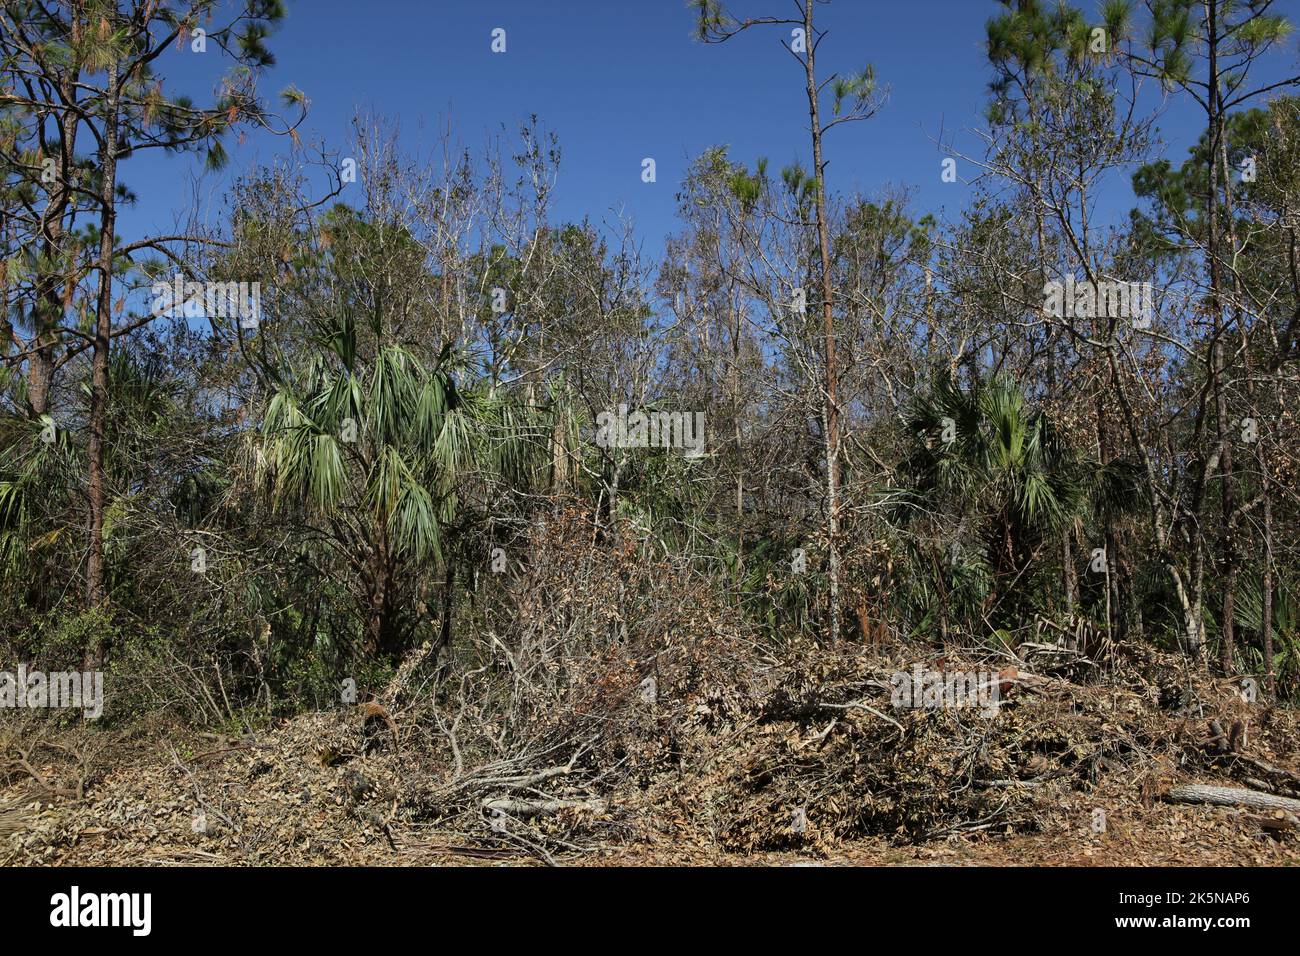 Brush, limbs and branches downed by Hurricane Ian lay along side of road awaiting pick up in N Fort Myers, Florida, Oct 8, 2022, © Katharine Andriotis Stock Photo